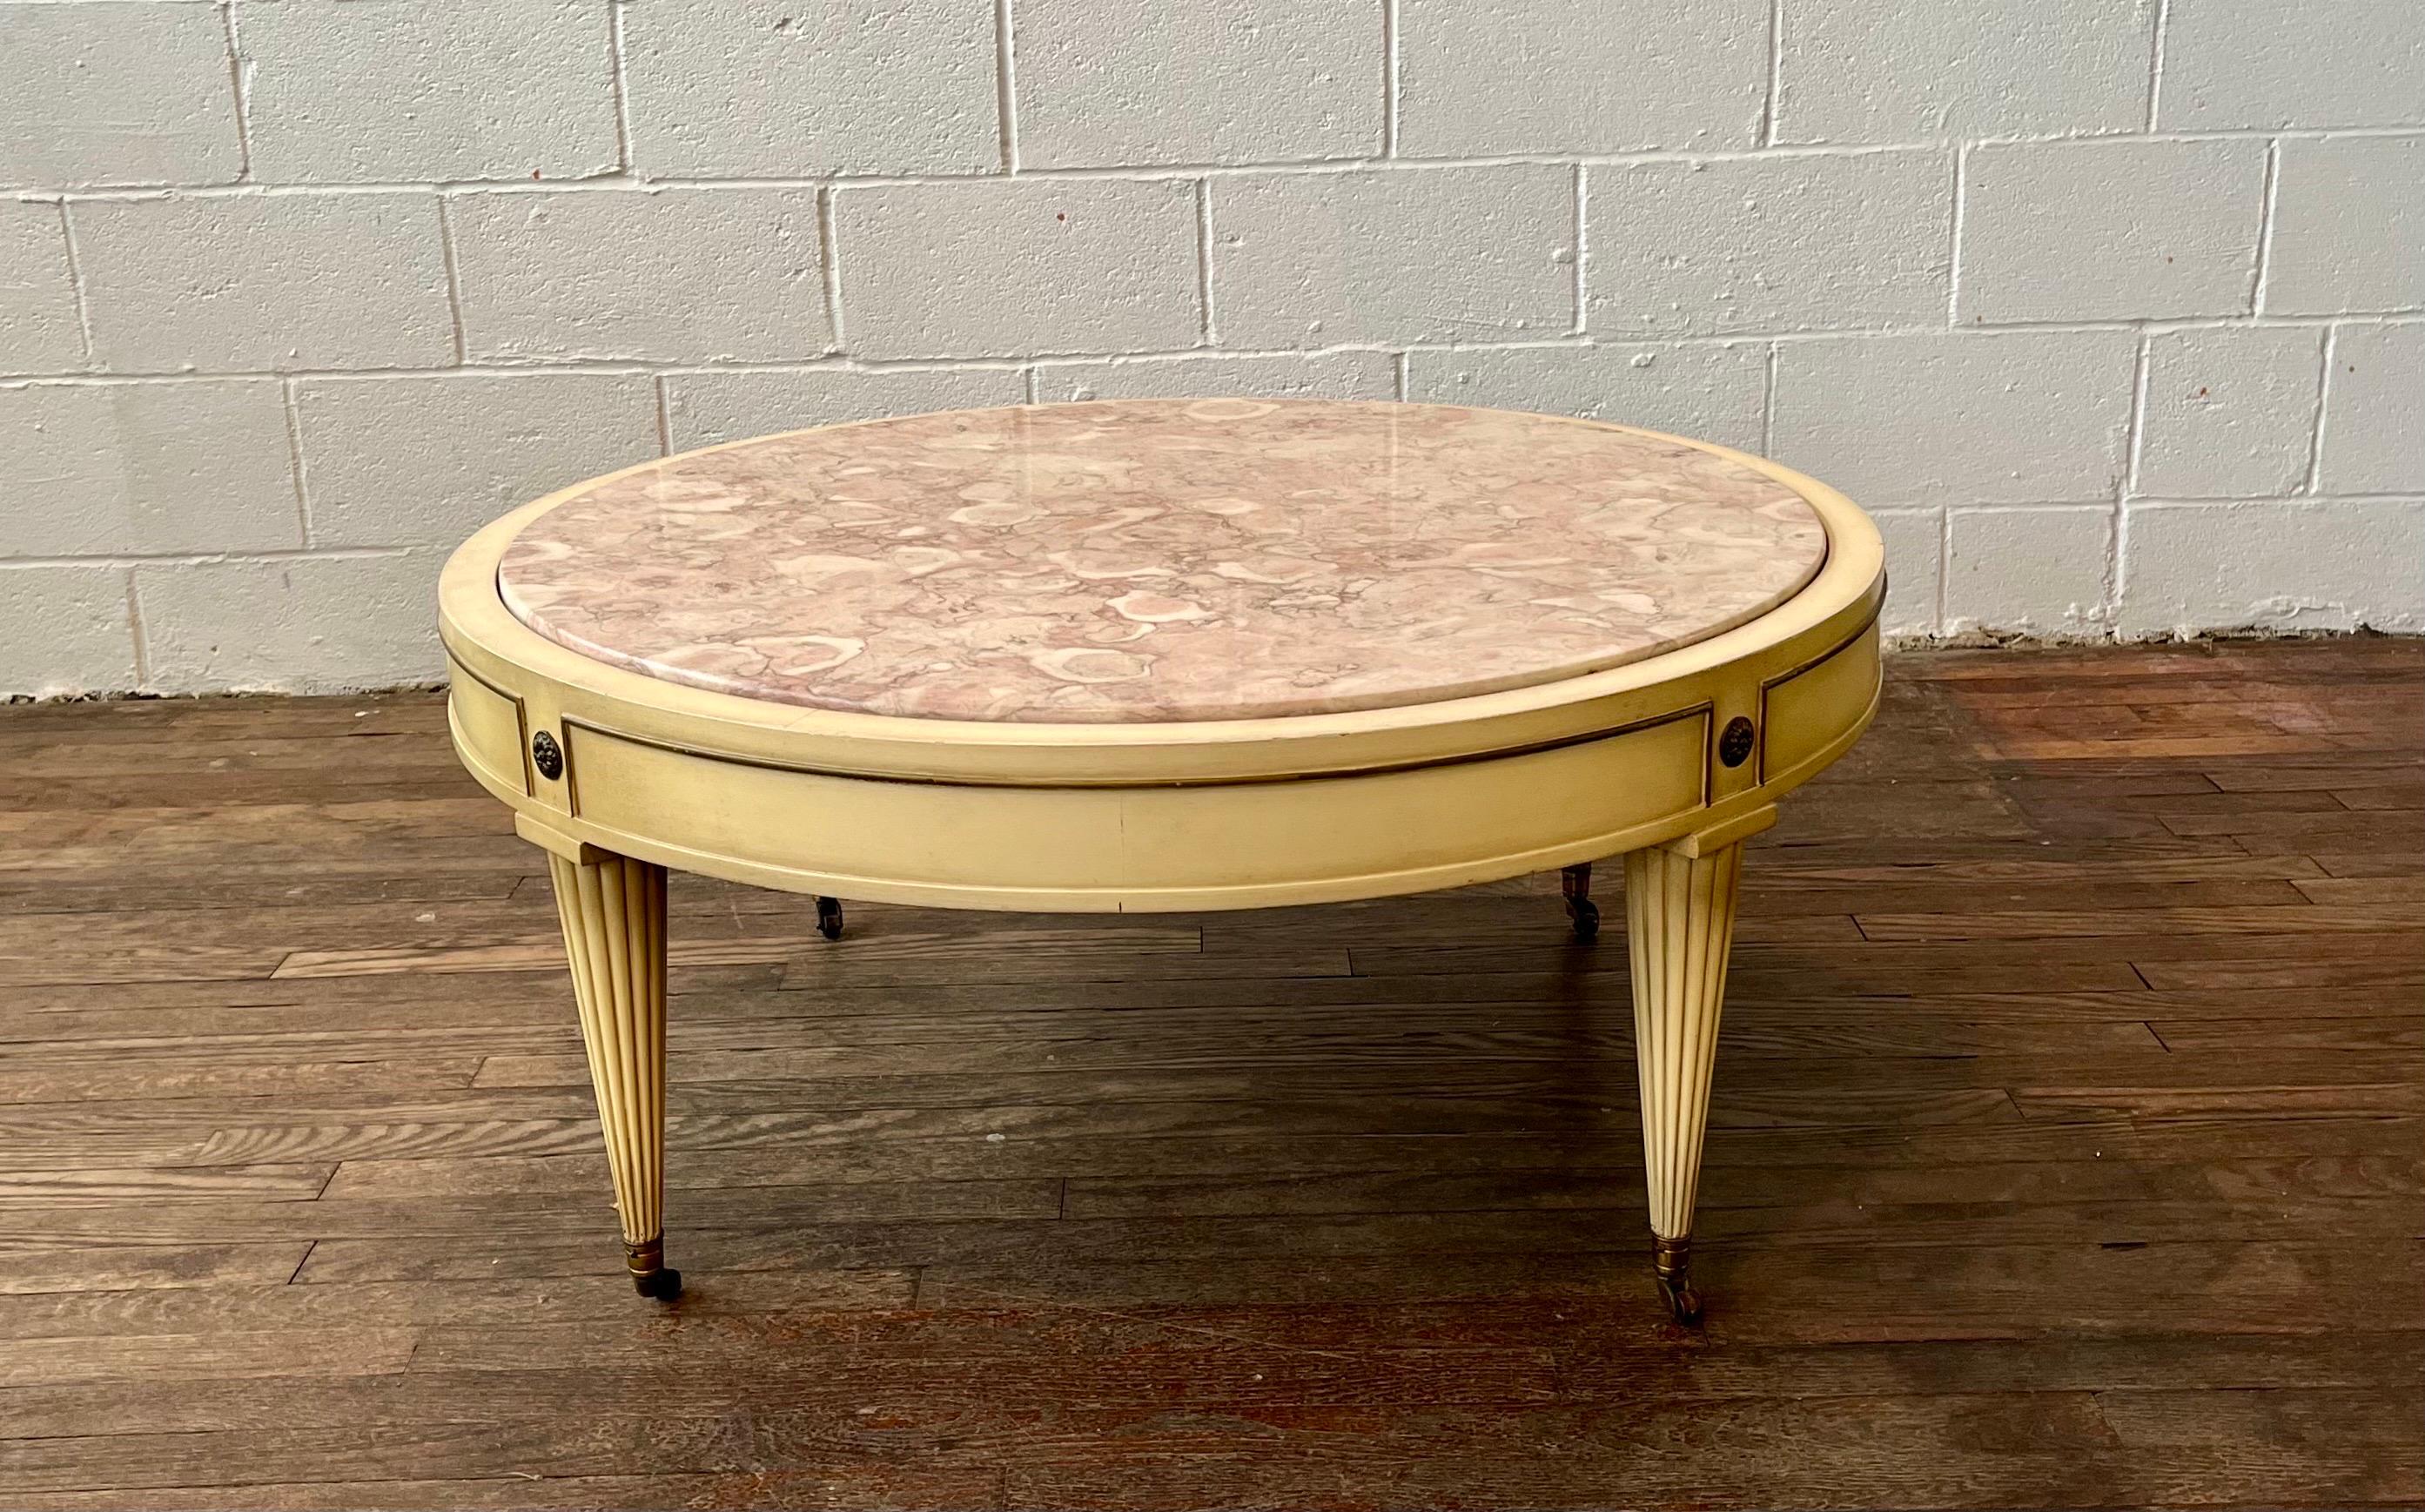 Classic pink marble coffee table set in regency style frame. Great lines and presence with pink fossilized marble top. Ornamental legs capped with brass casters. R&J Arnold Corp.
Curbside to NYC/Philly $300